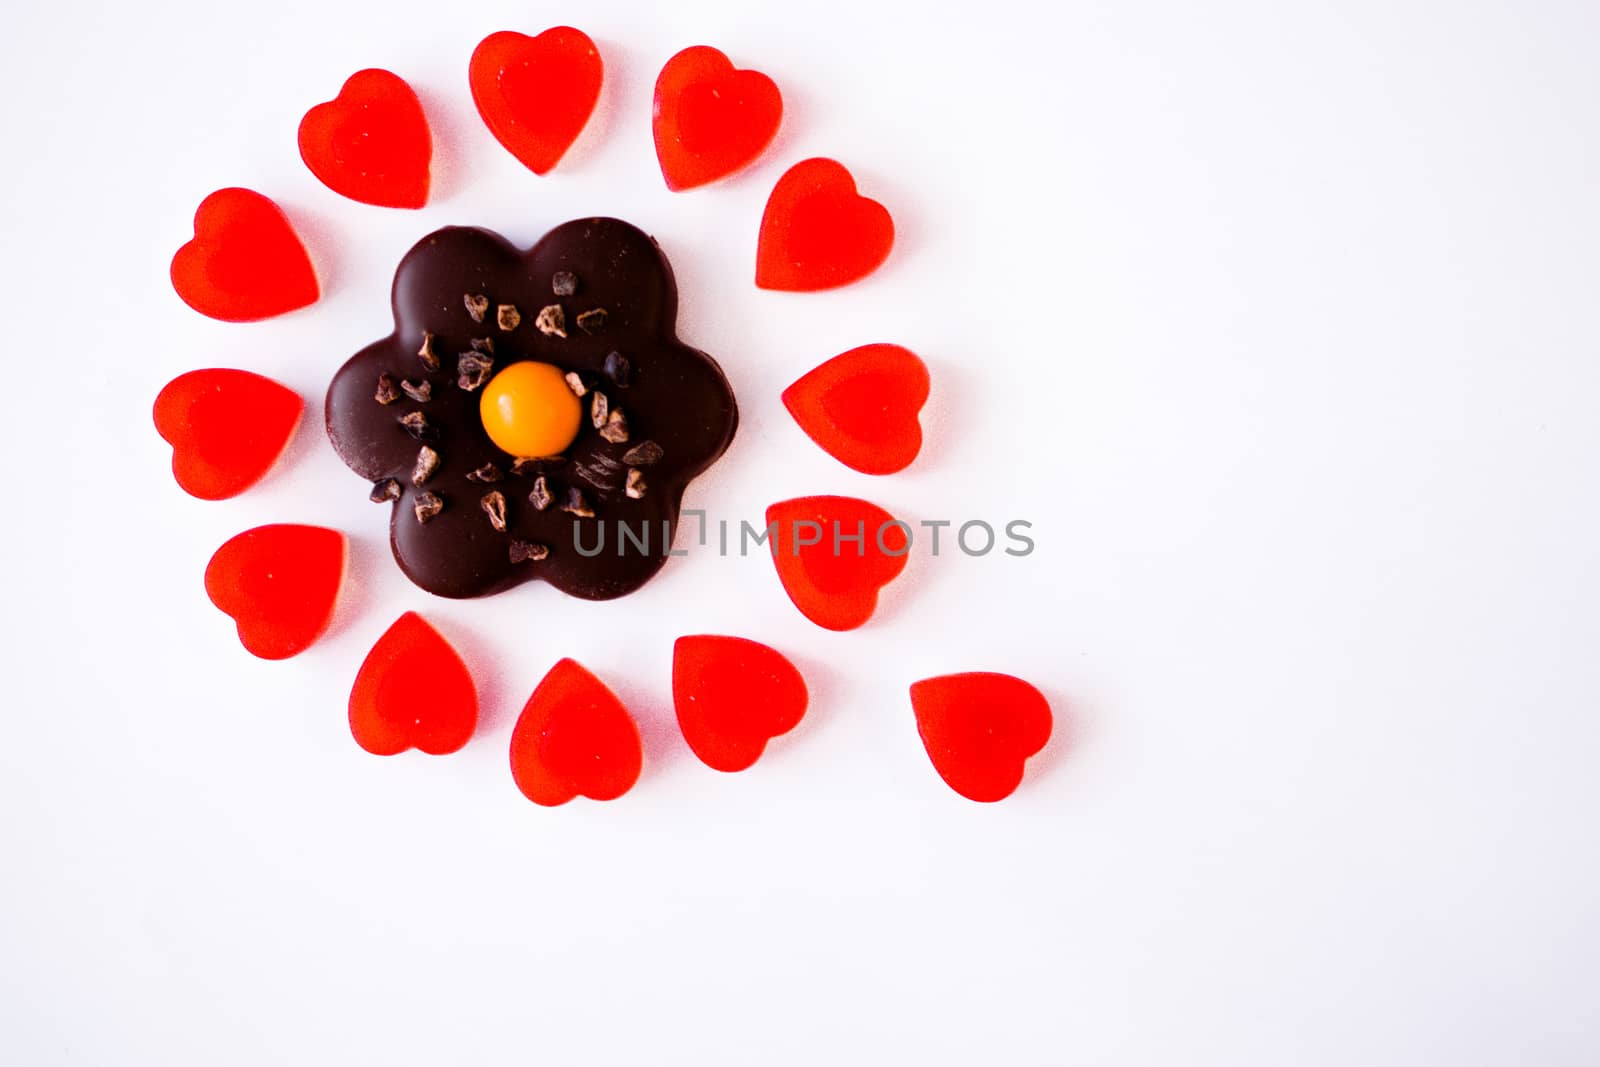 confectionery - marmalade in the form of a heart and cookies in the form of a flower by alexandr_sorokin